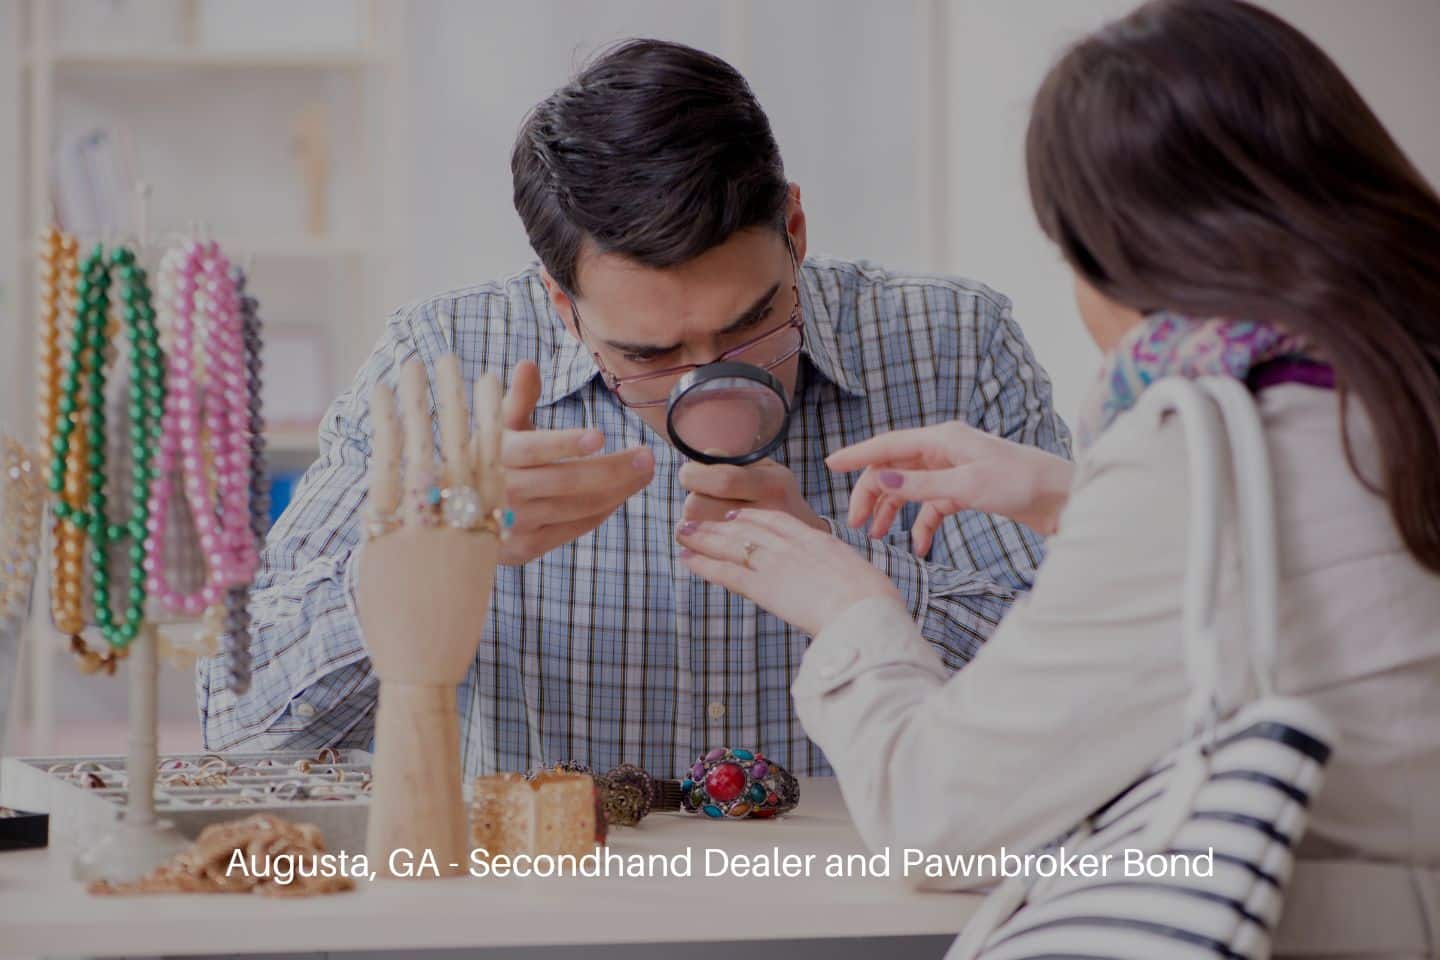 Augusta, GA - Secondhand Dealer and Pawnbroker Bond - Woman visiting jeweler for jewelry evaluation.